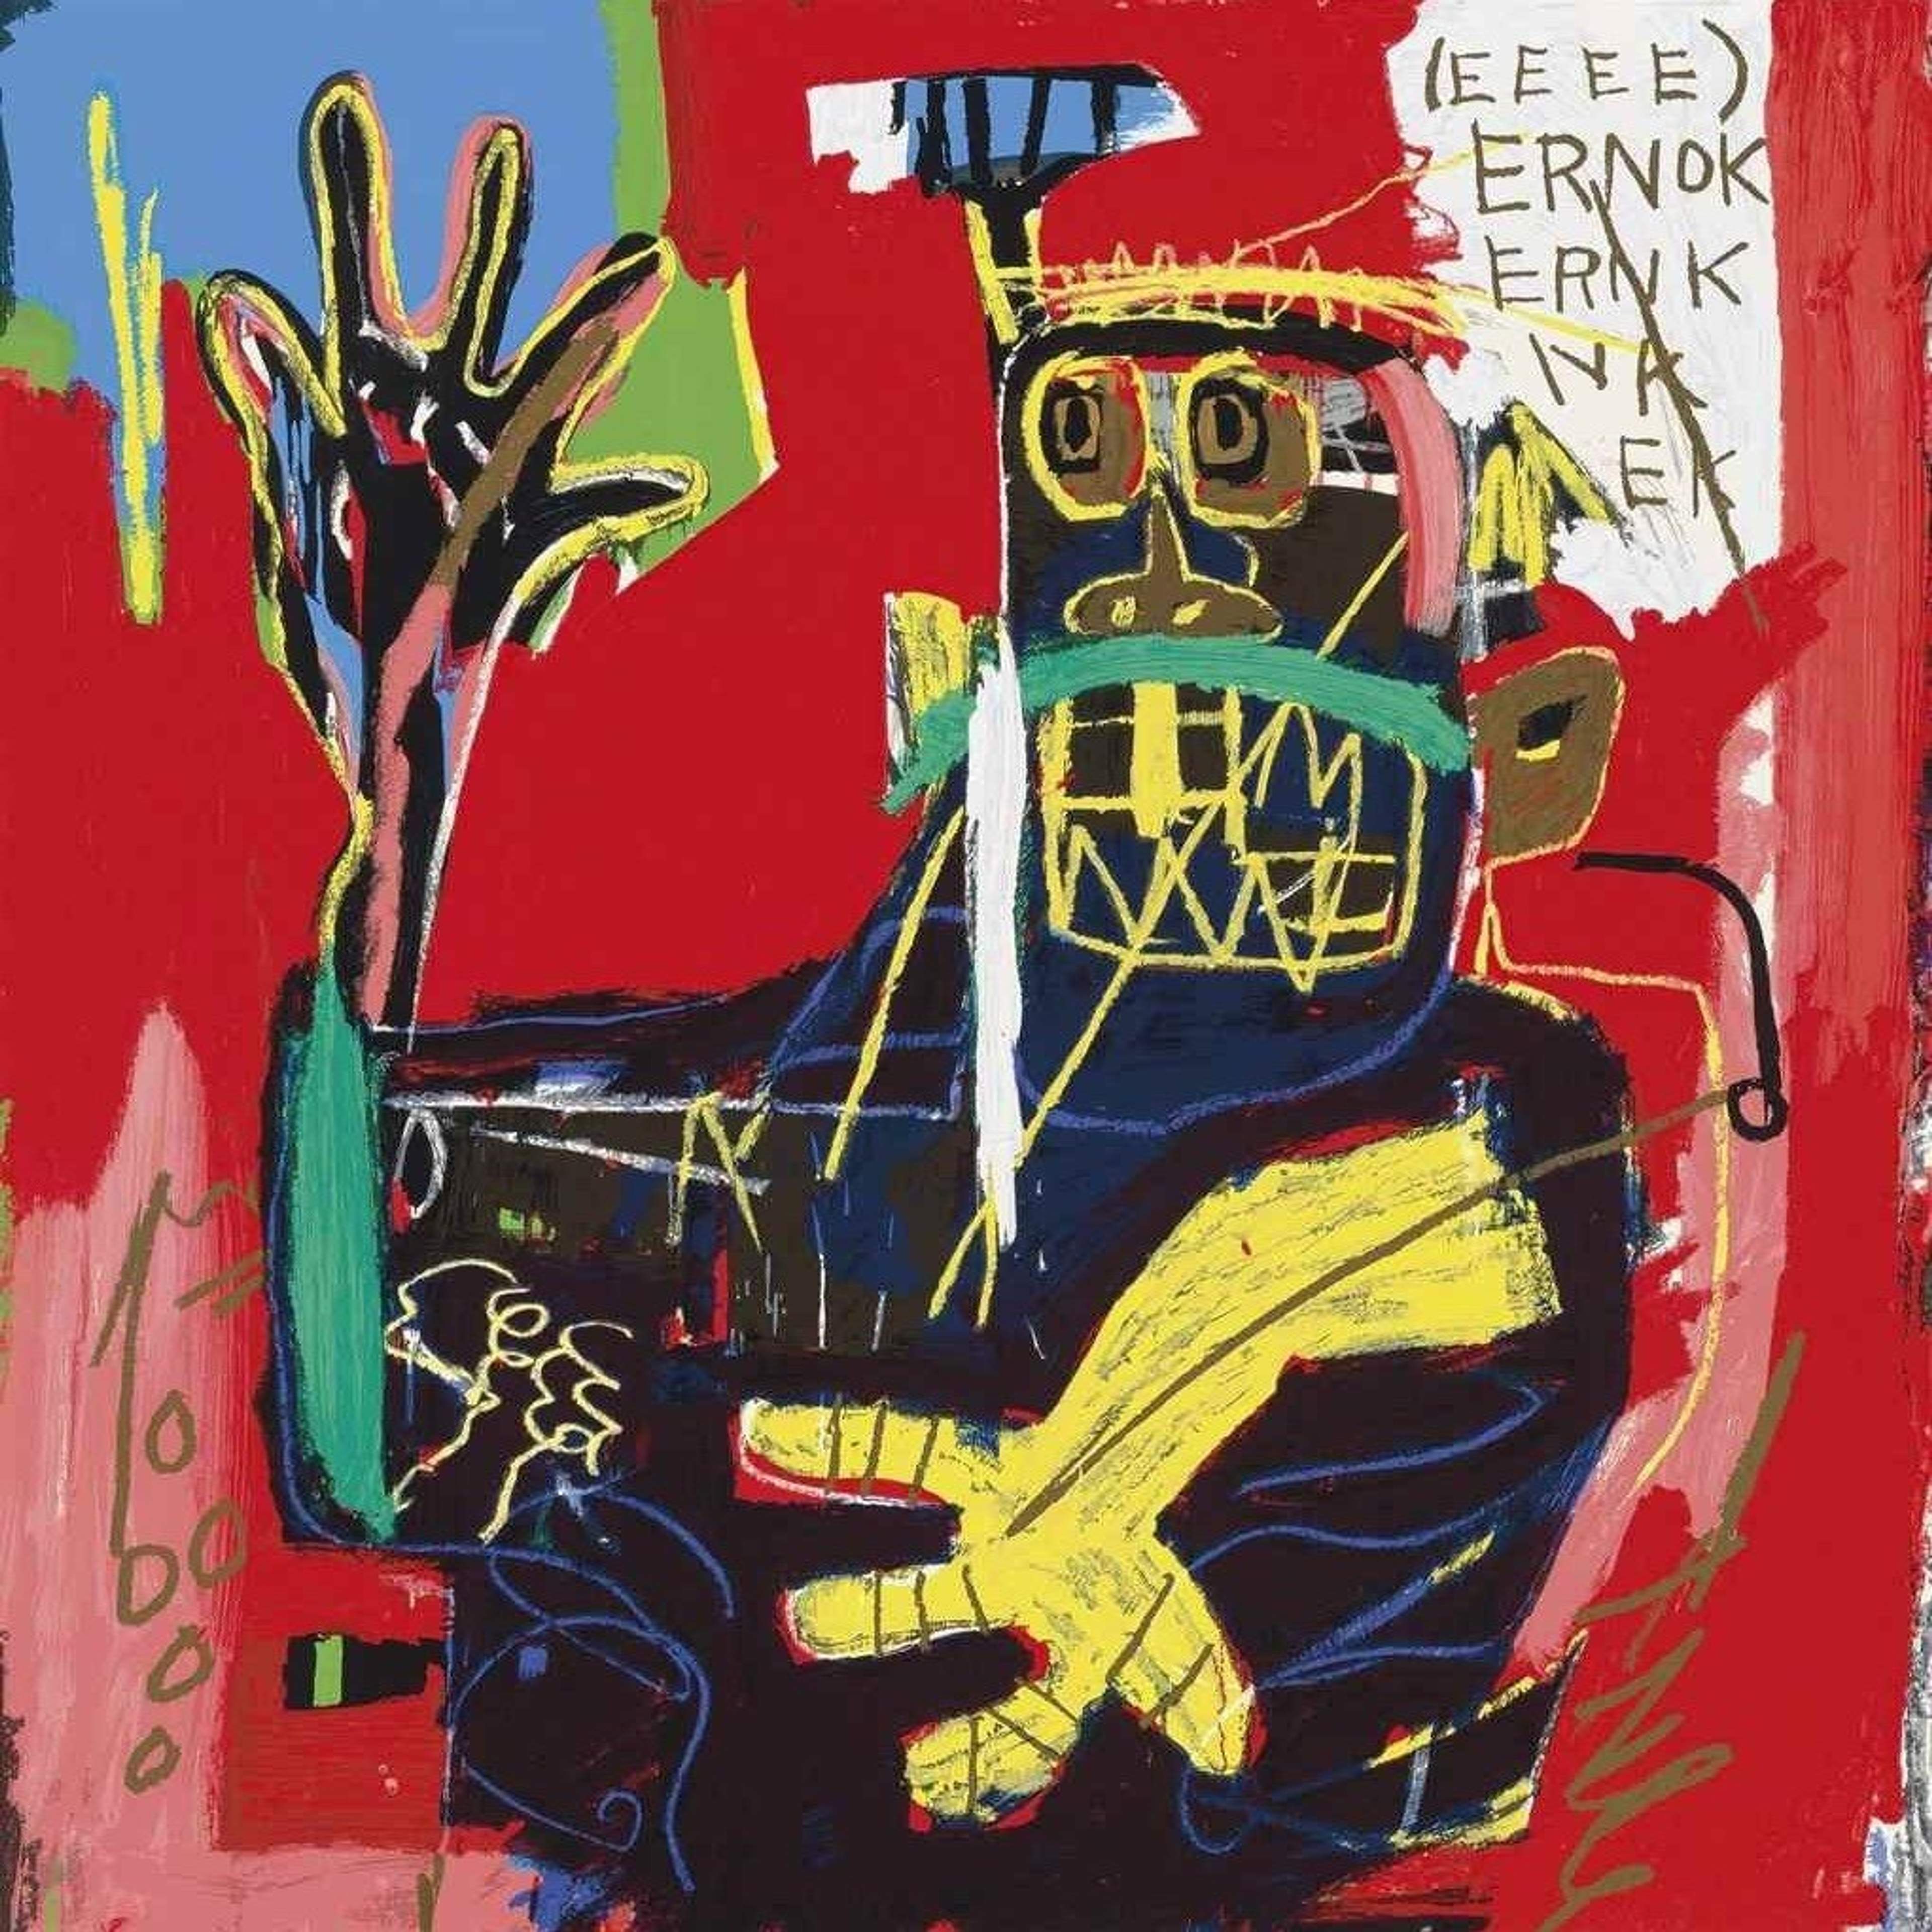 A Buyer’s Guide To Jean-Michel Basquiat